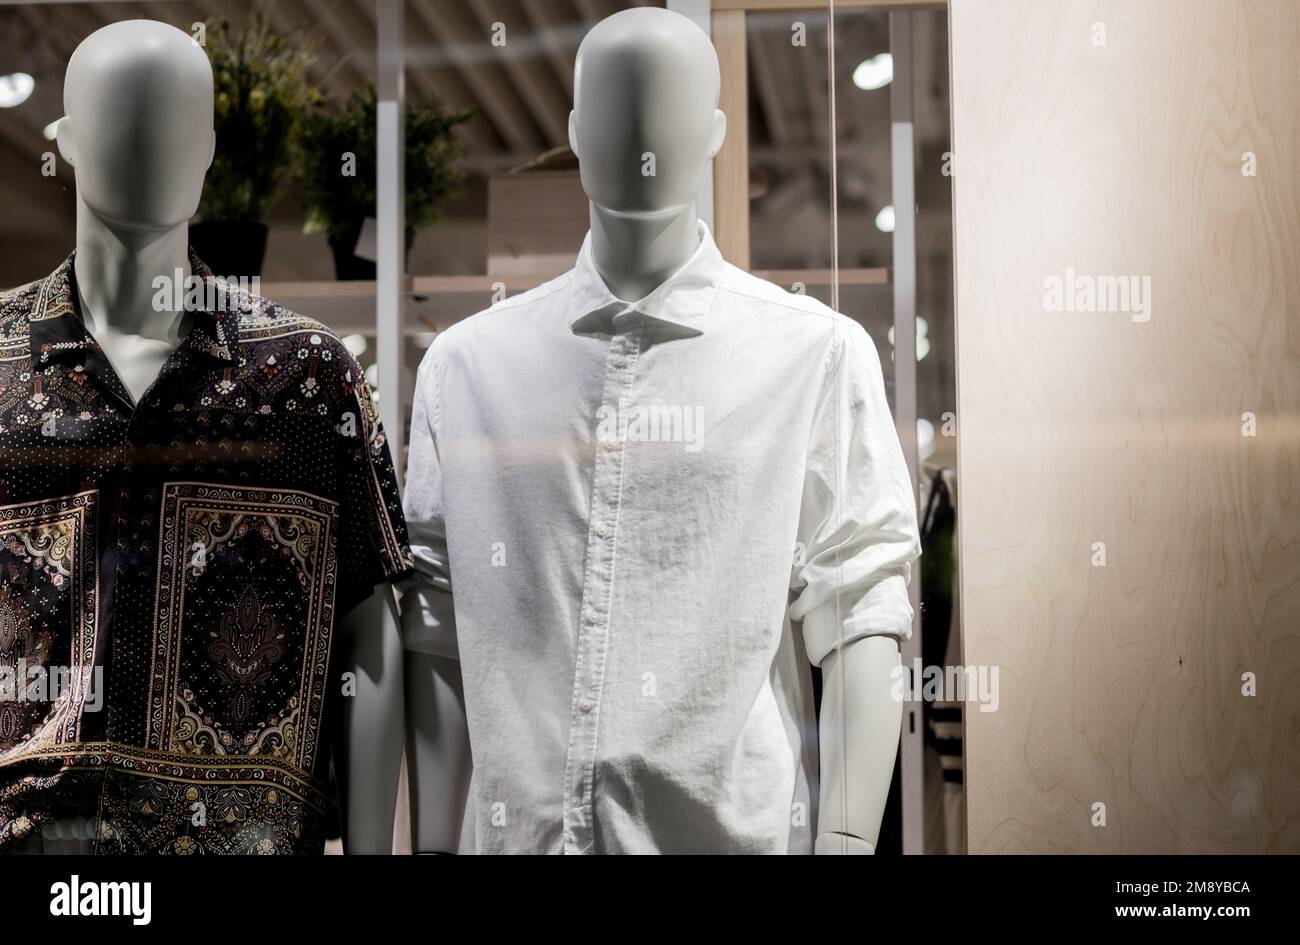 Two male mannequins dressed in shirt. No brand names or copyright objects. Stock Photo